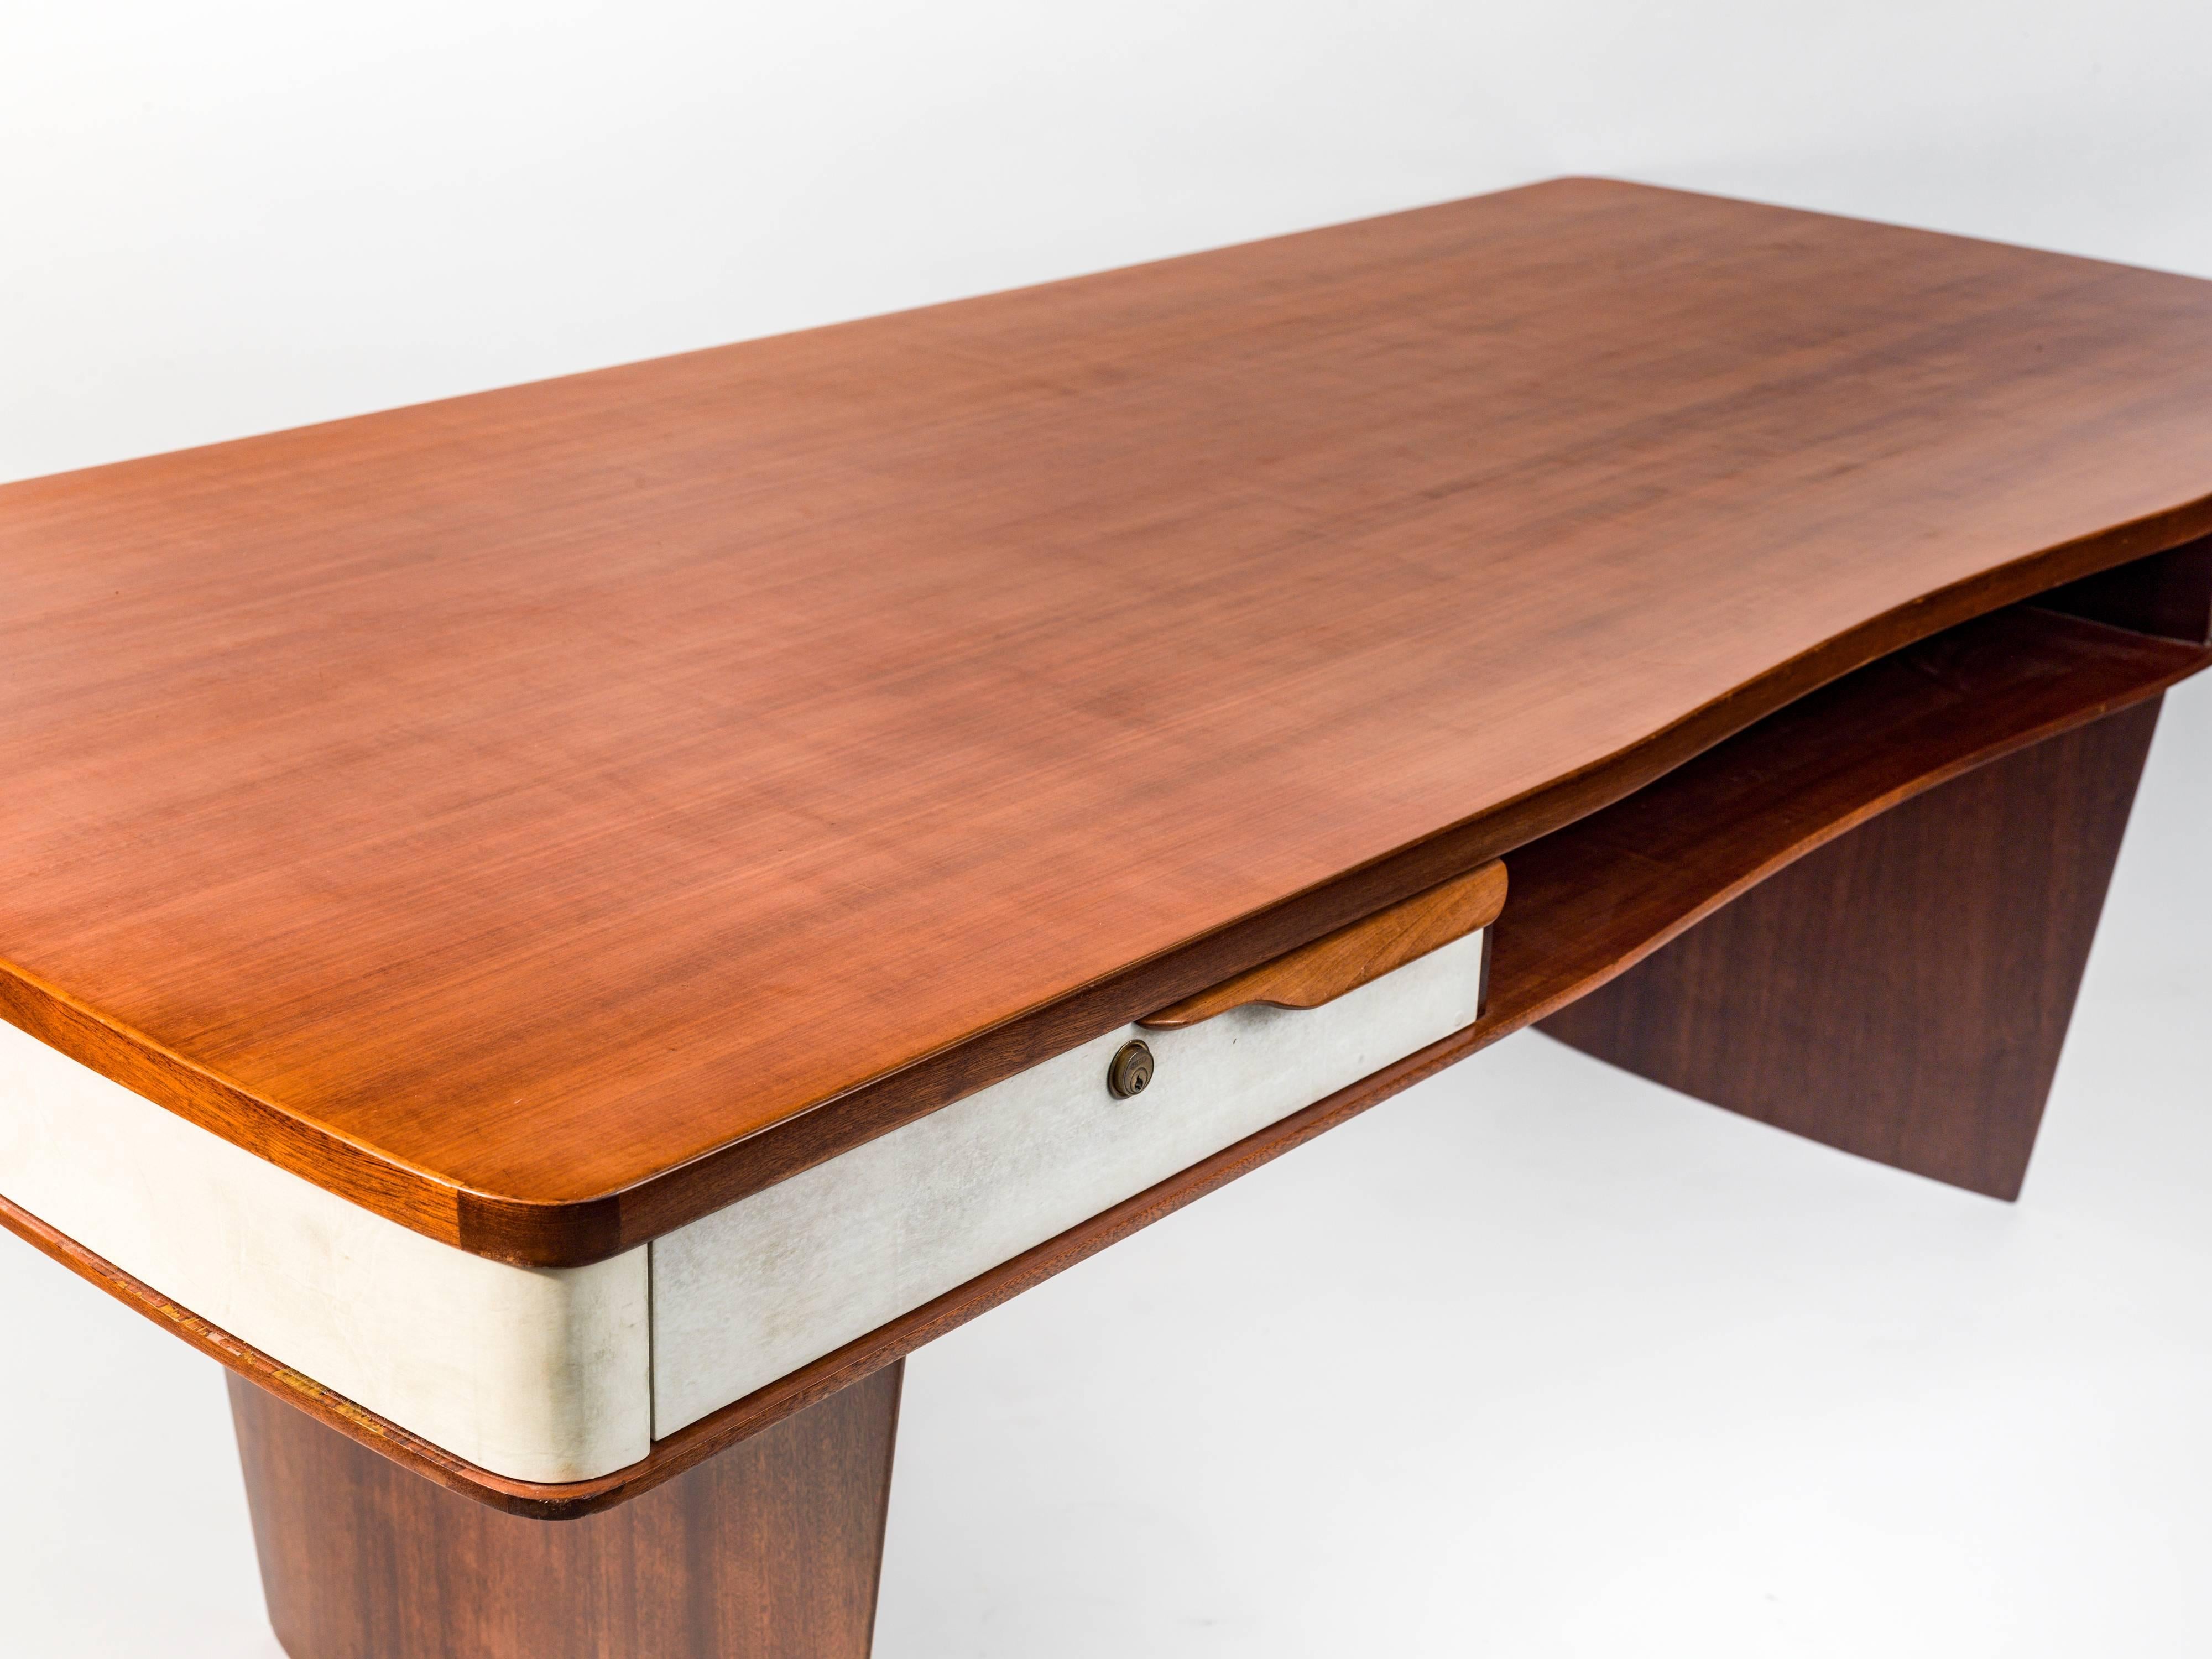 A modernist design desk having two drawers and central storage areas front and back. Executed in mahogany with parchment details on drawer fronts and around the entire apron, Italian, circa 1955.